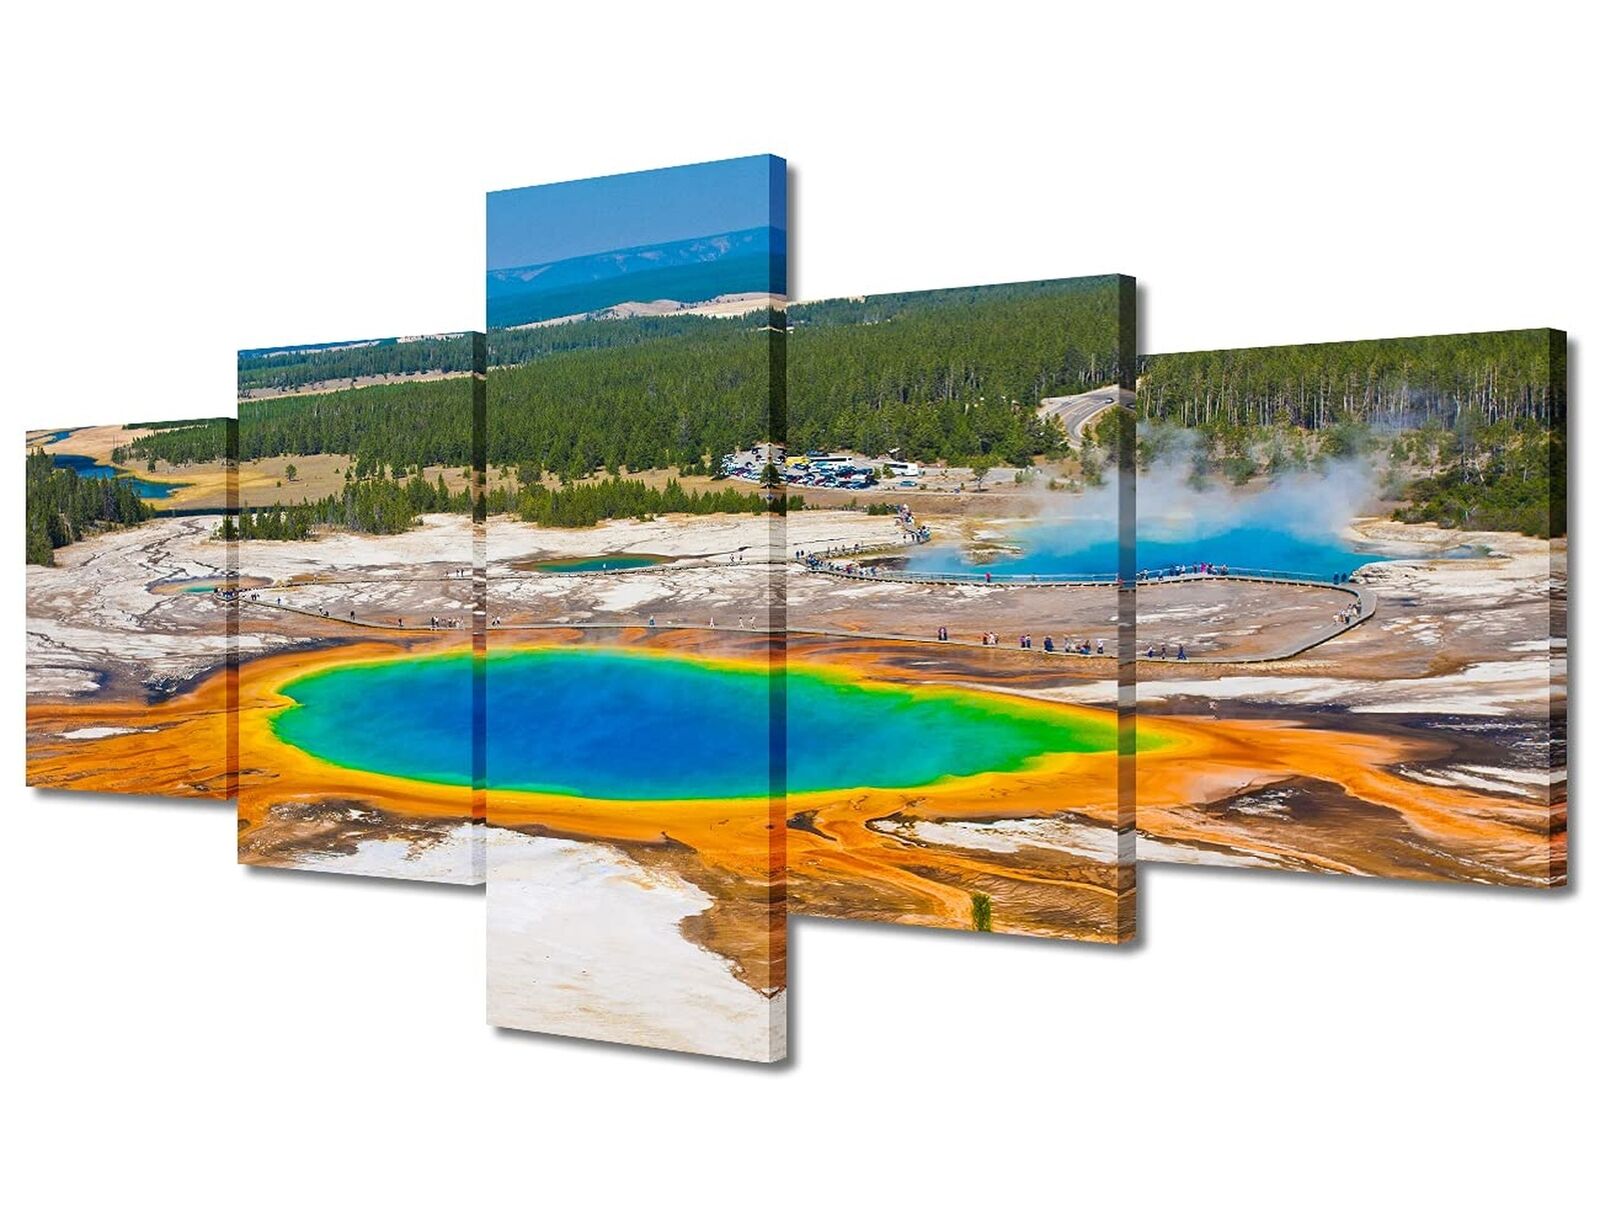 TUMOVO Yellowstone National Park Wall Art Grand Prismatic Spring Pictures for...